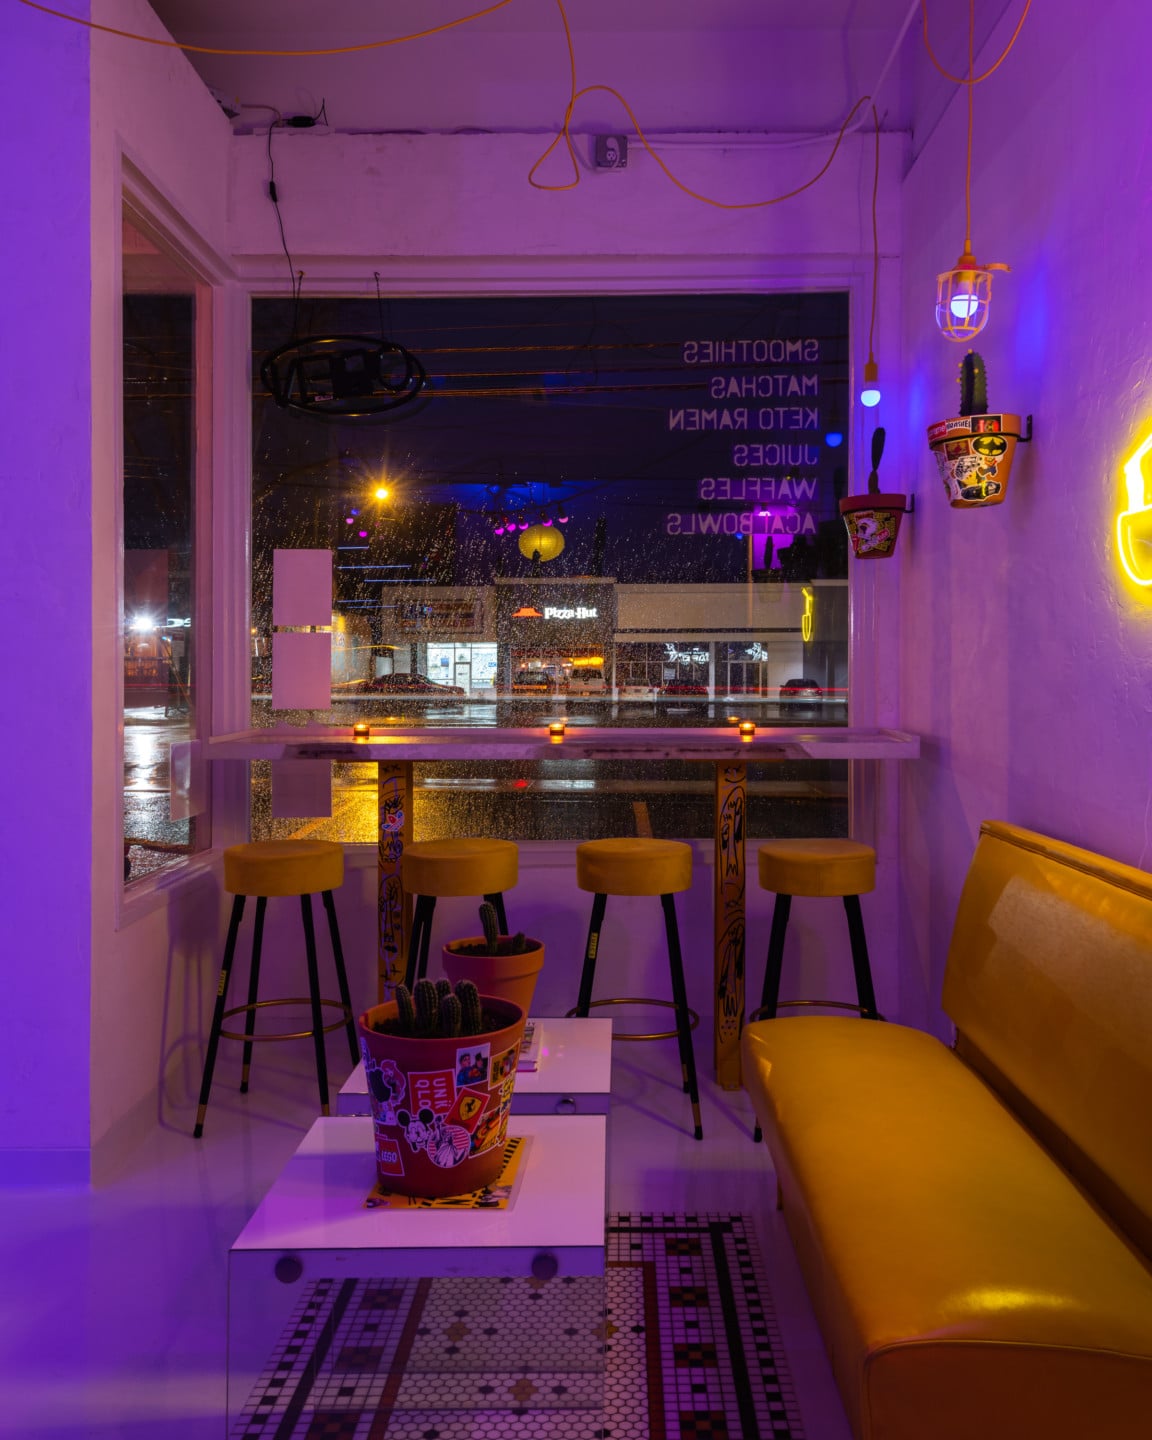 A corner of a shop with windows, white tables, yellow stools and sofas, planters on tables and walls and hanging purple lights.